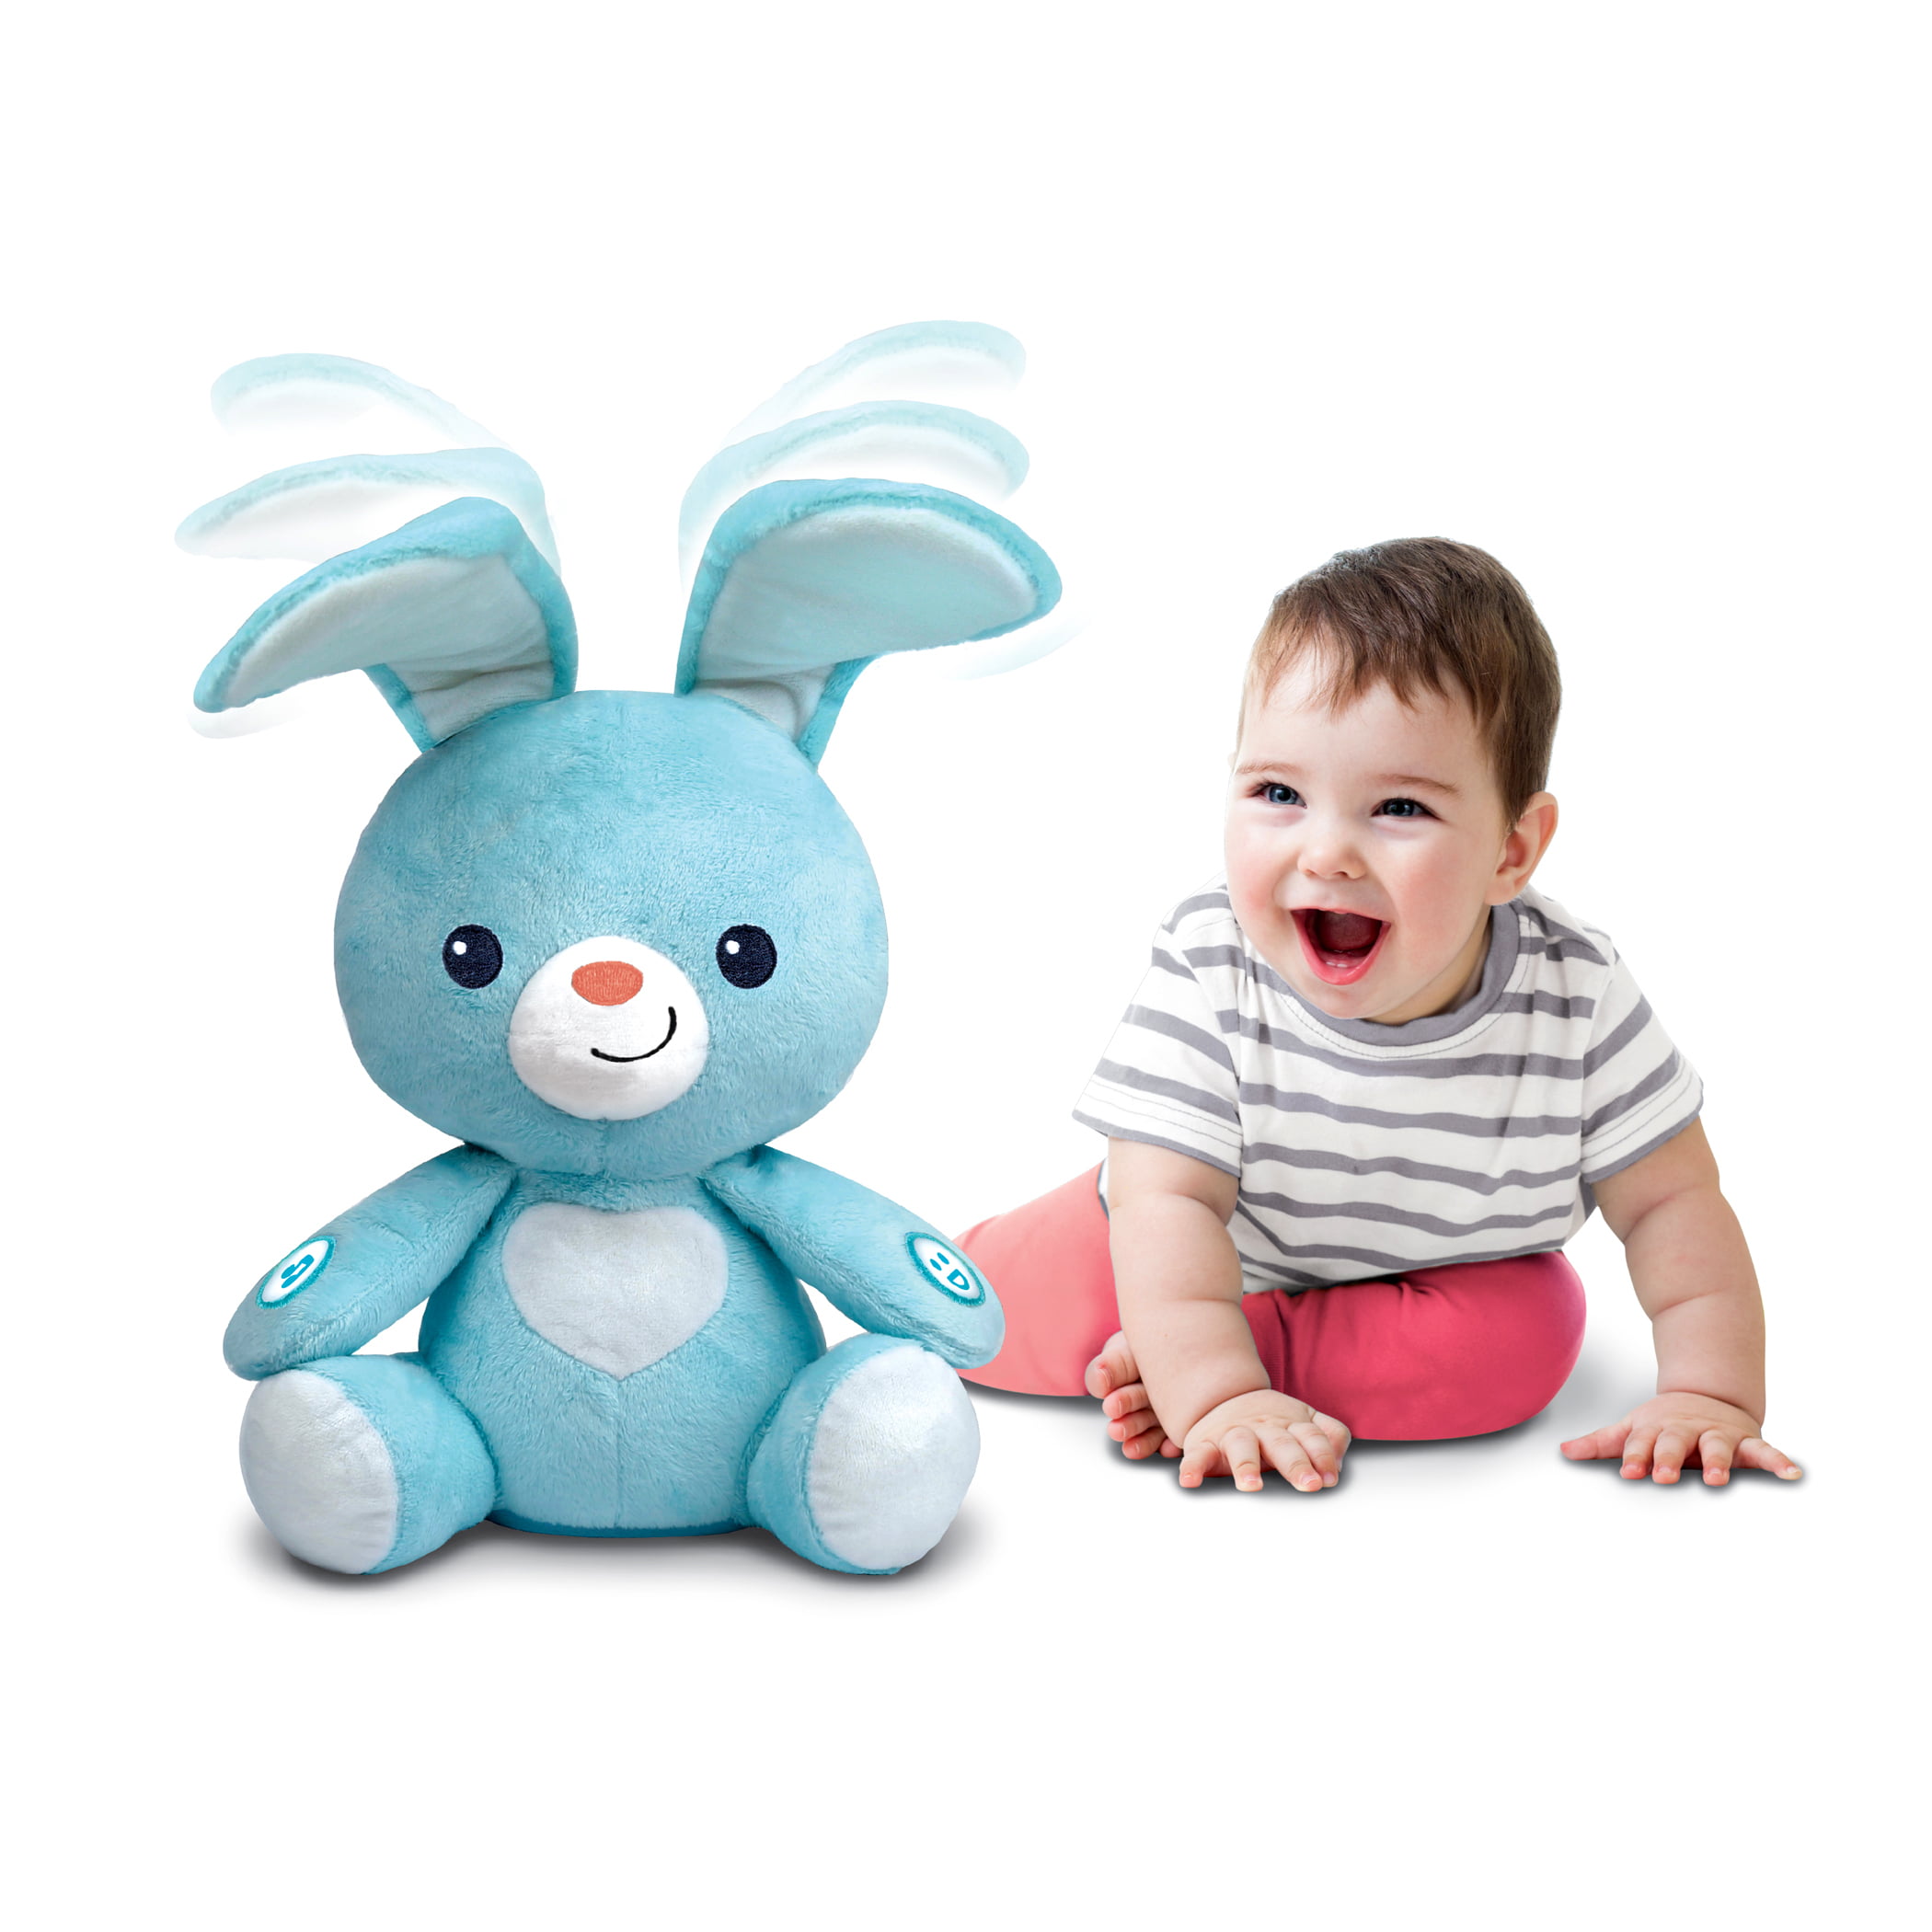 Winfun Plush Peekaboo Light up Bunny - Ages 6 Months and up, Girl or Boy  Item